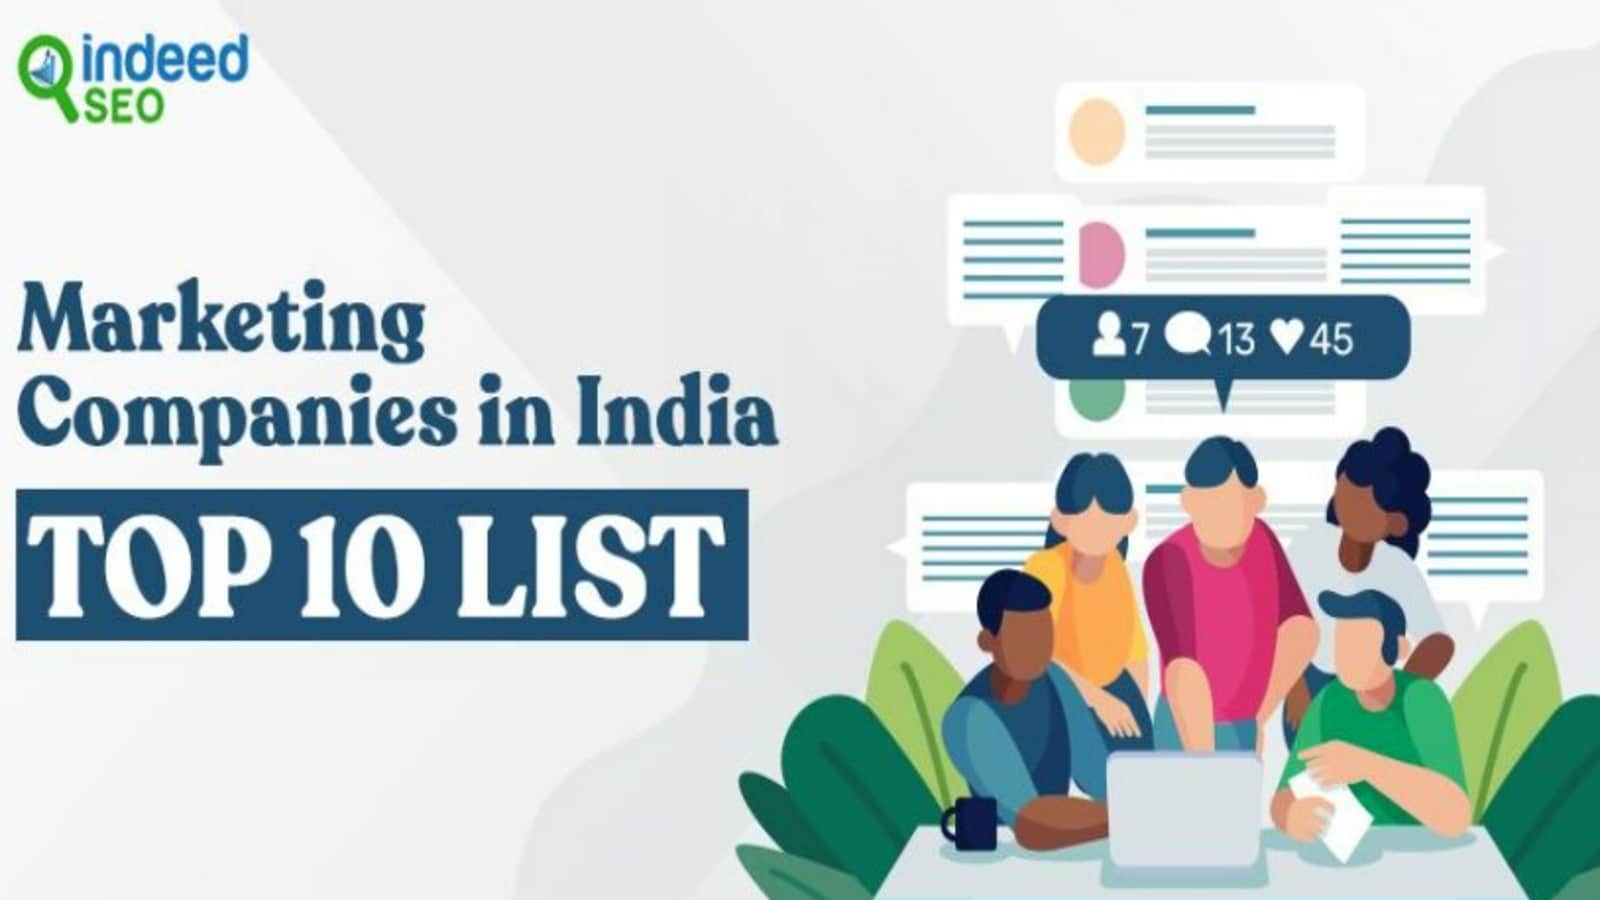 Marketing Companies in India: Top 10 List